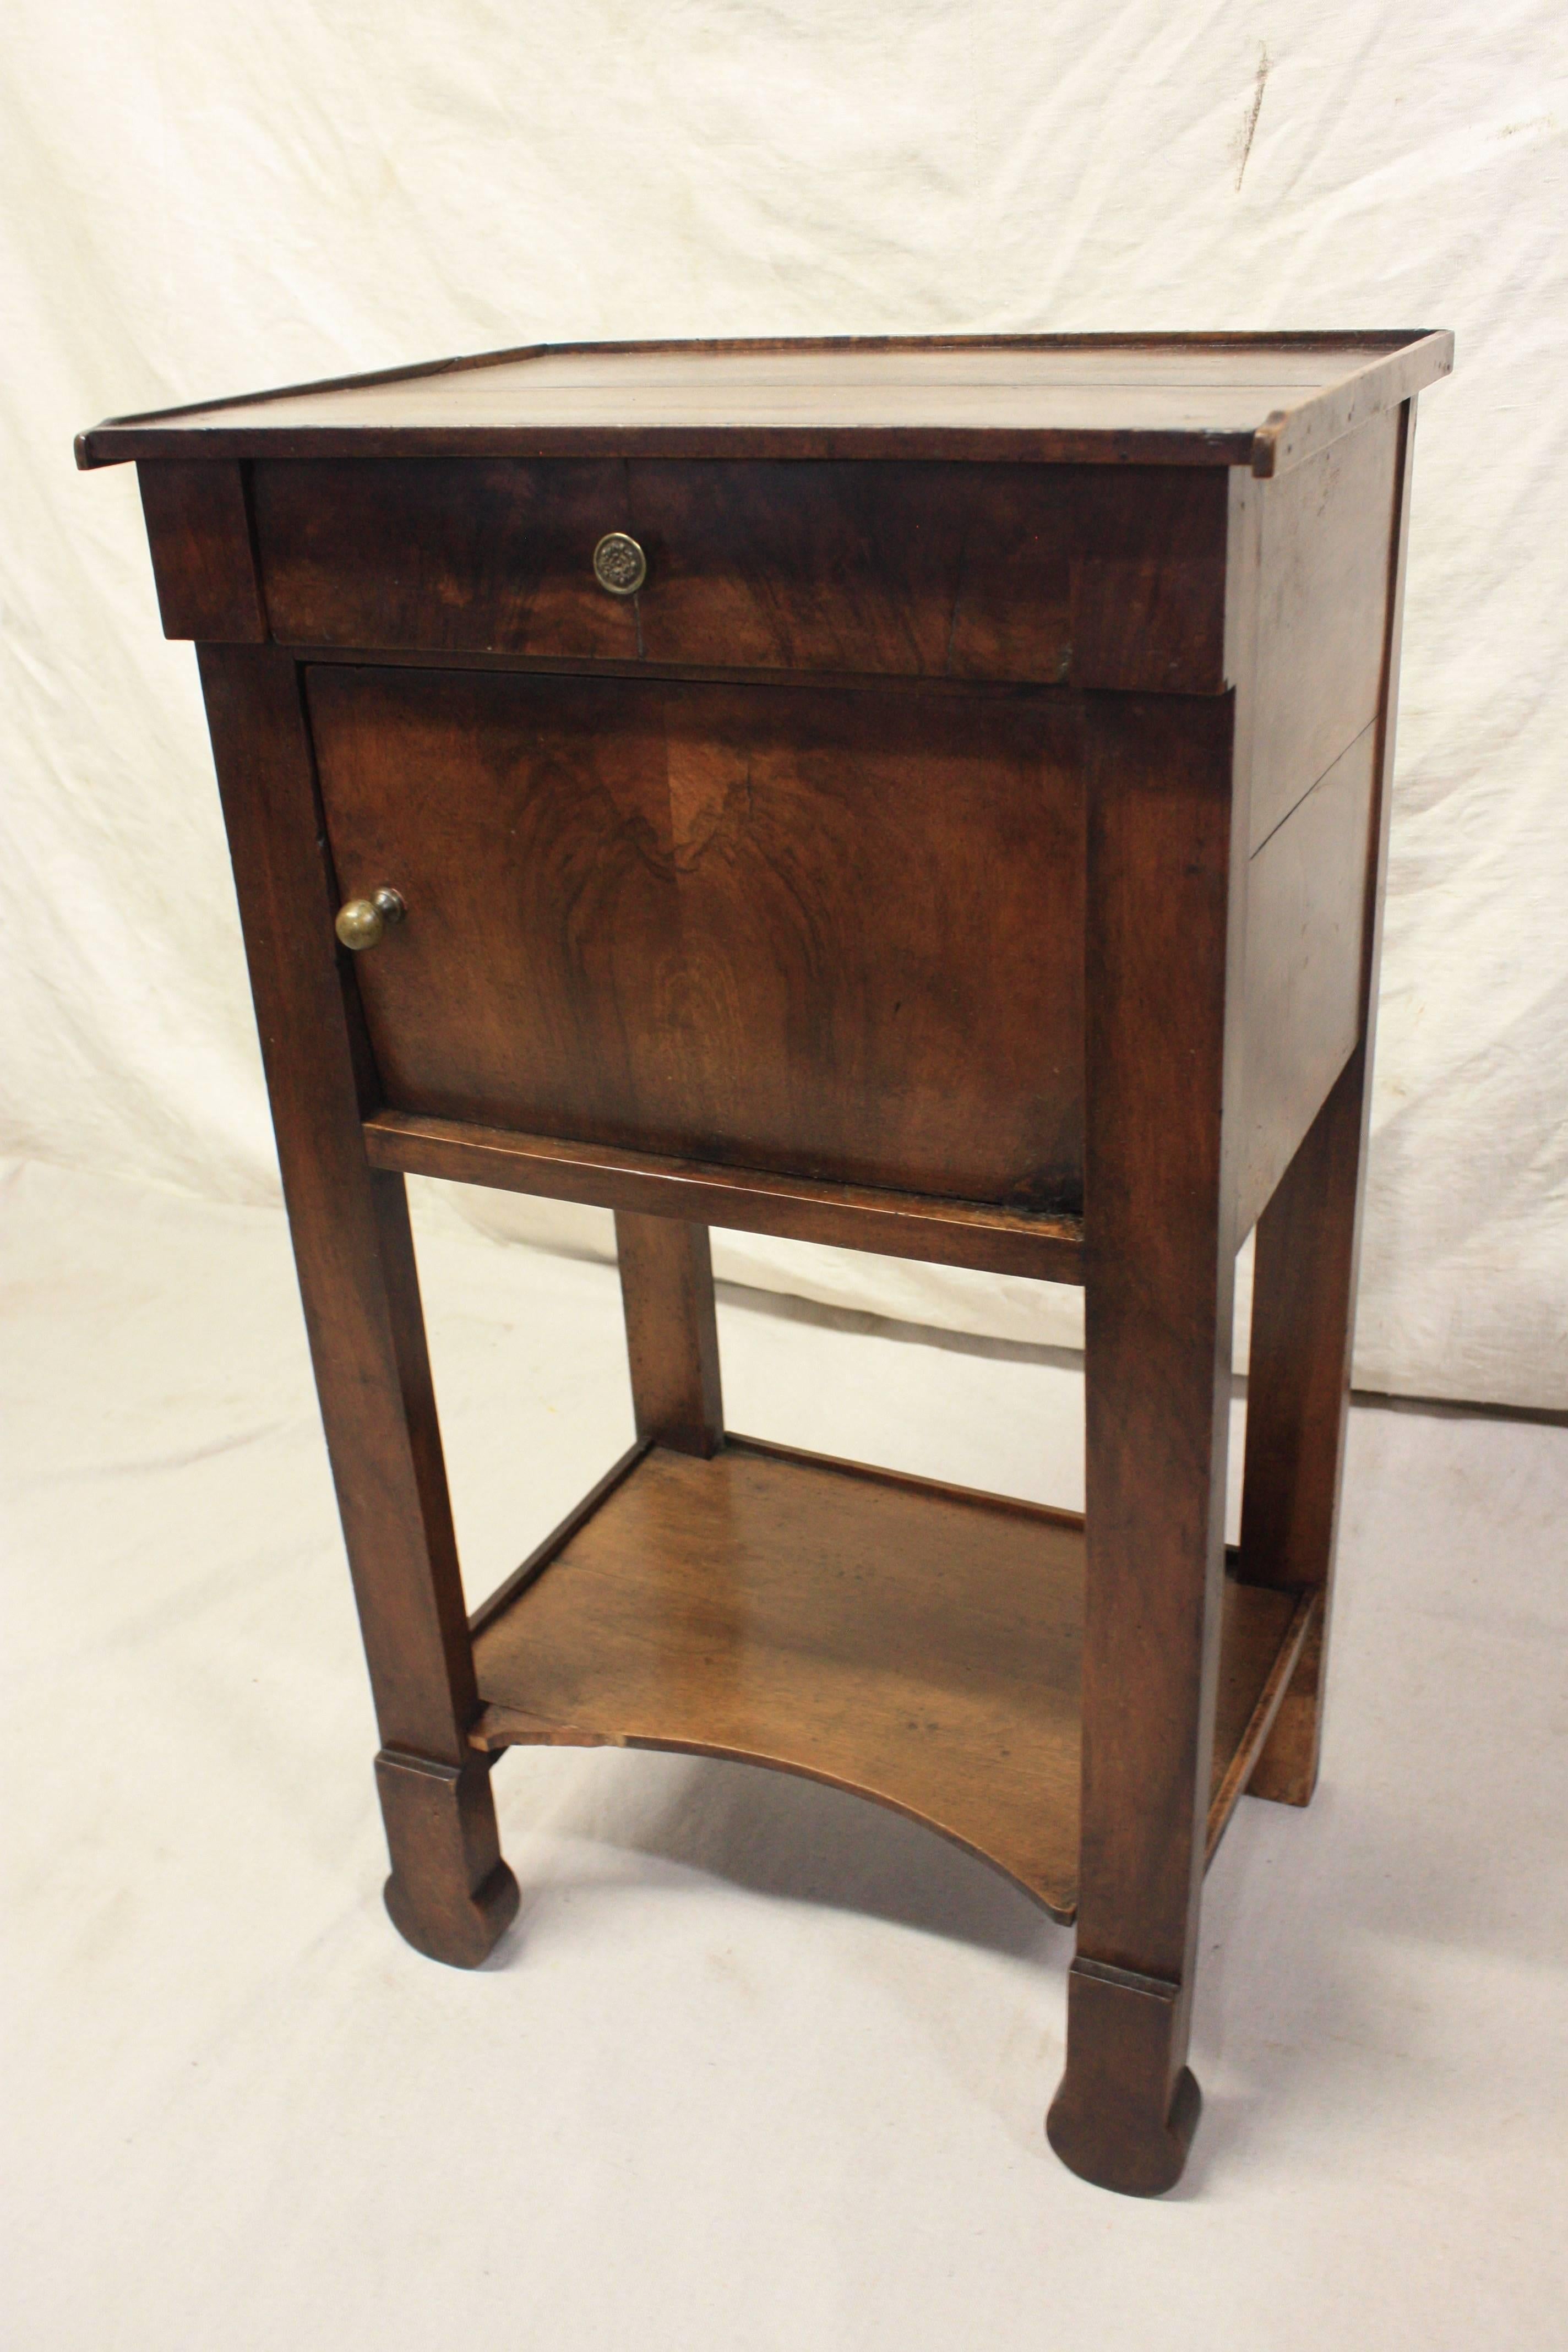 Late 18th century side table, French Restauration period.